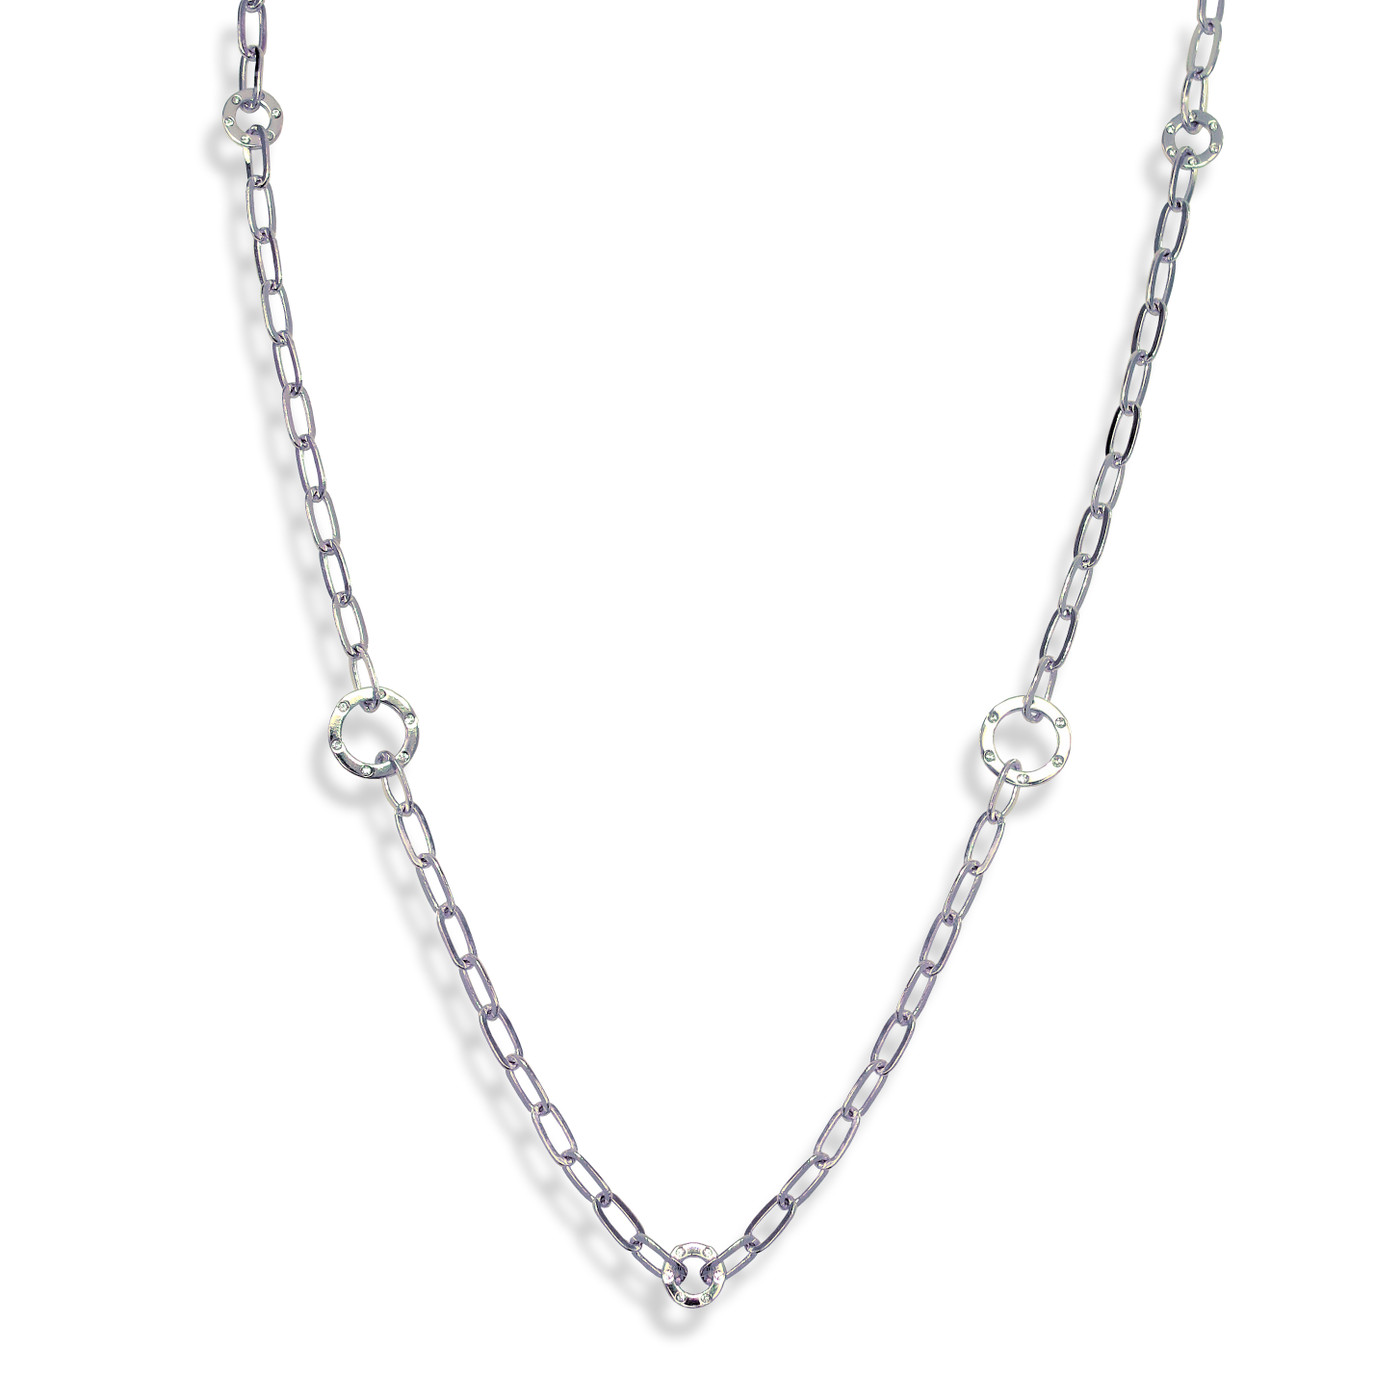 Grand Long Chain Necklace 